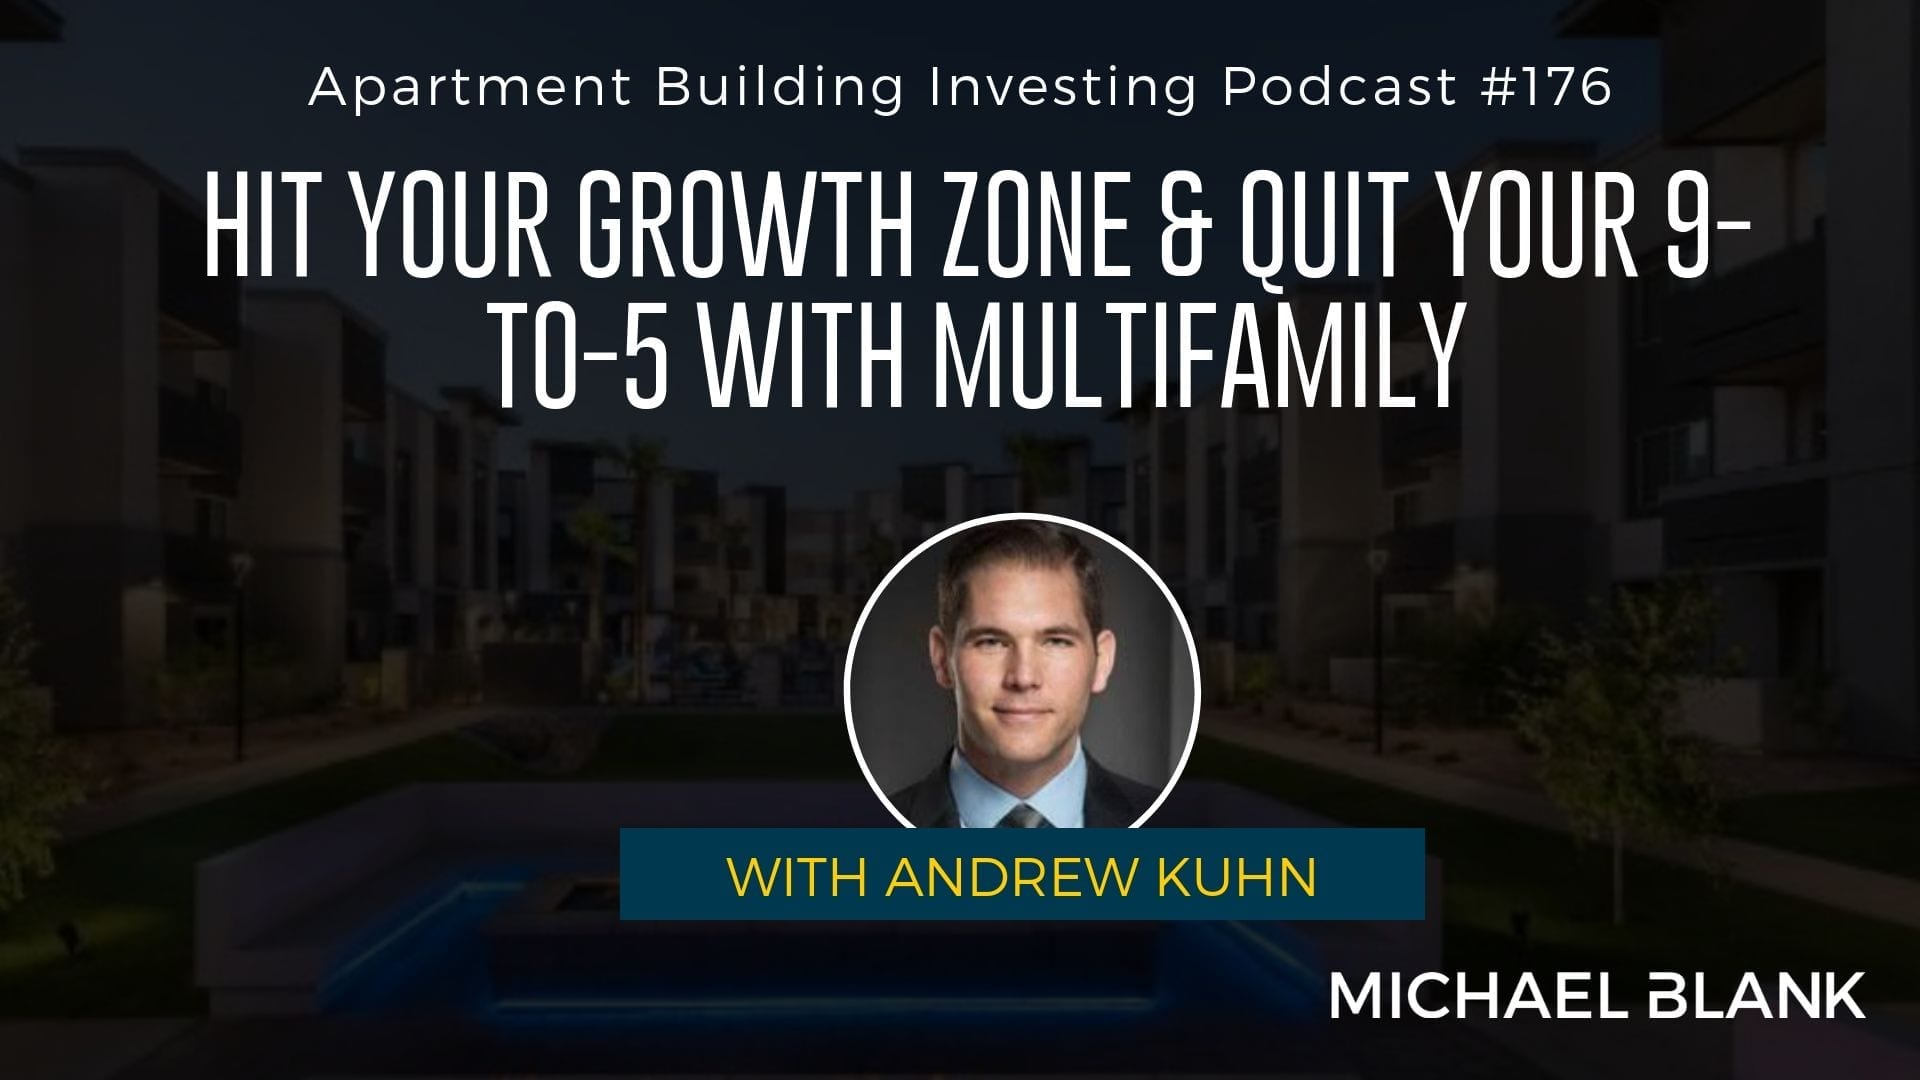 MB 176: Hit Your Growth Zone & Quit Your 9-to-5 with Multifamily – With Andrew Kuhn